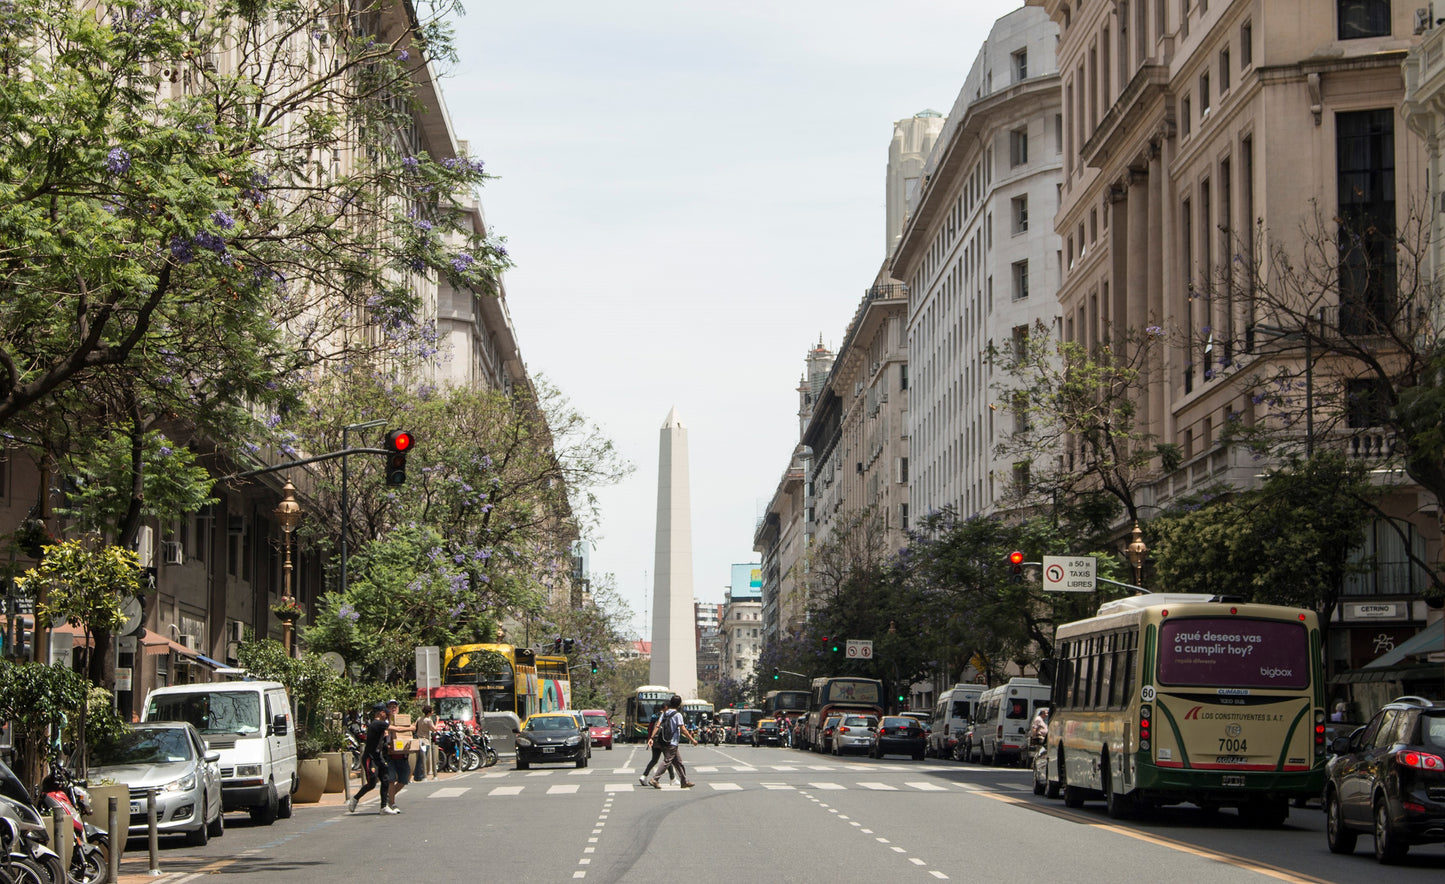 The Best Walking Tour of: Downtown Buenos Aires